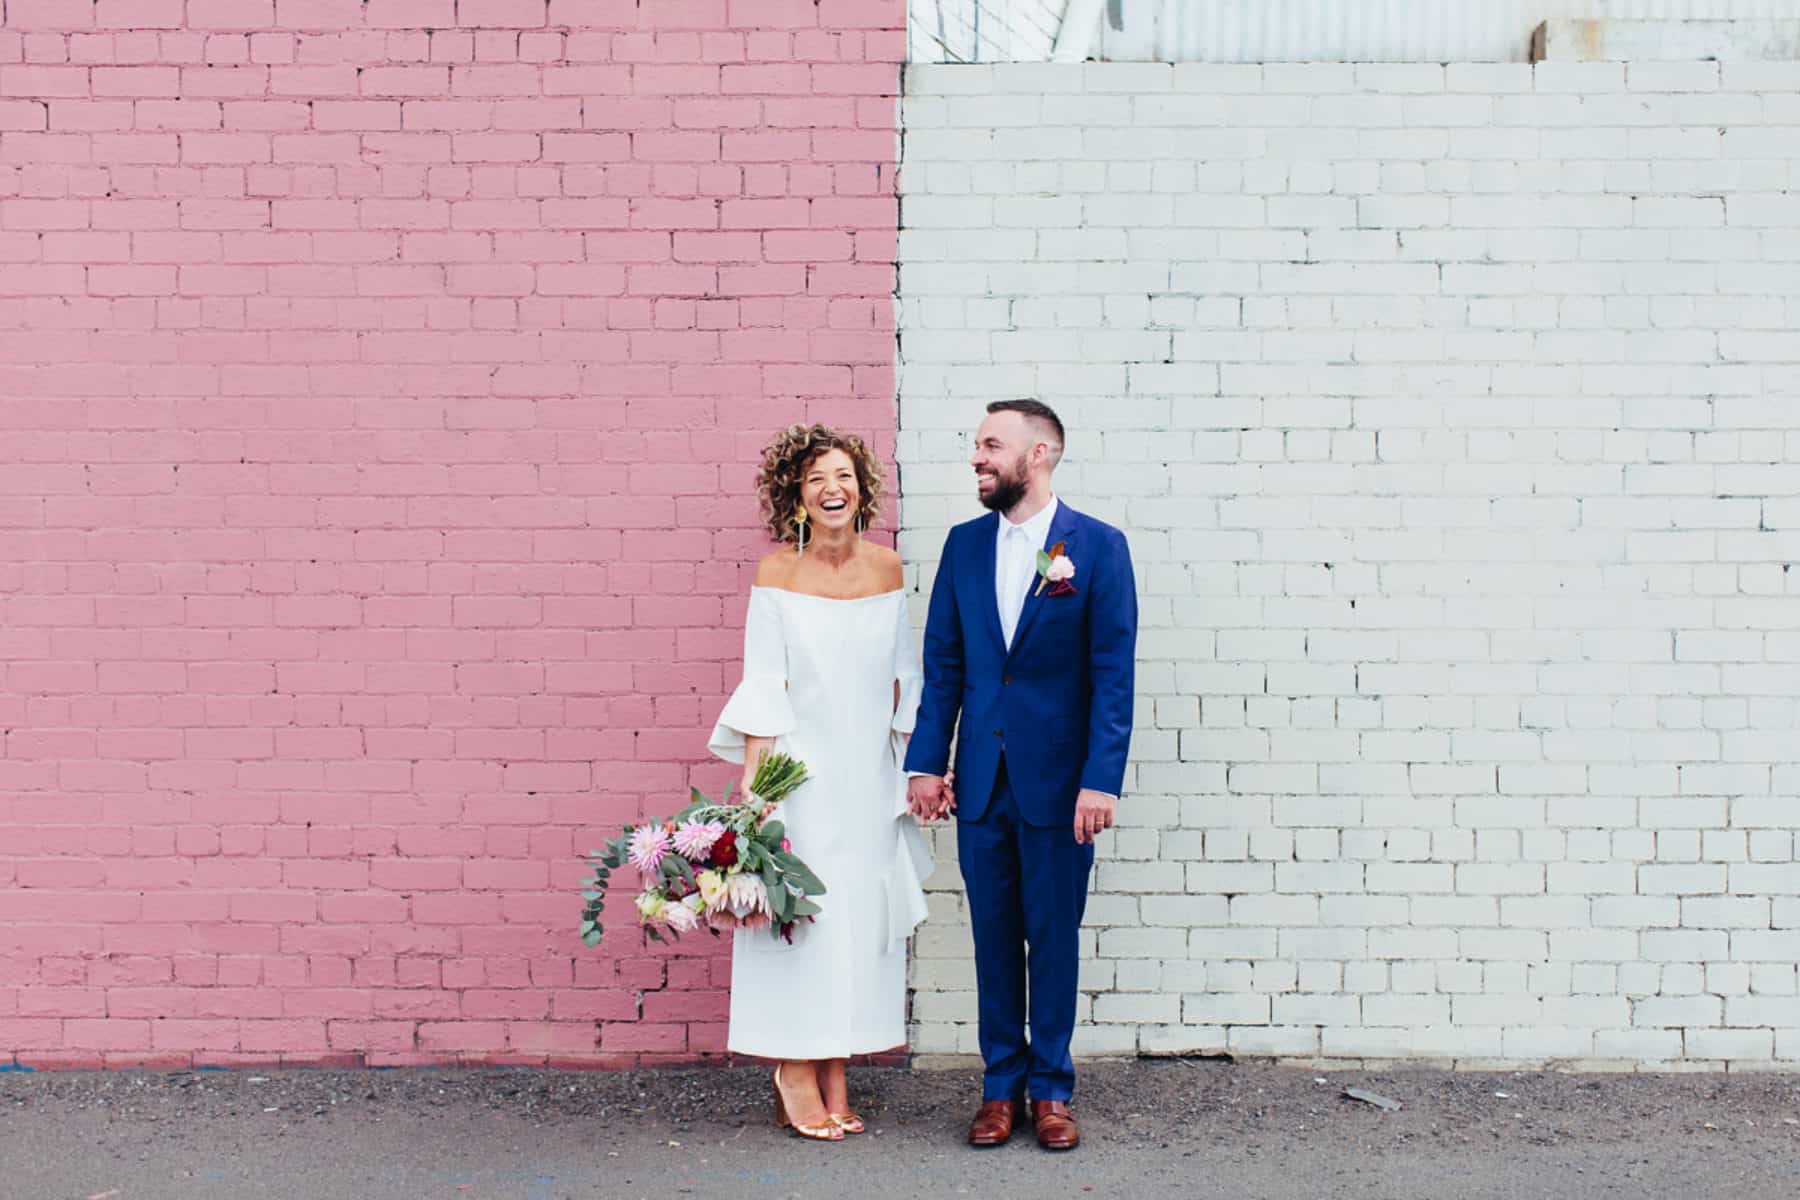 Top 10 weddings of 2017 | Georgia & Brent’s Warehouse Wedding at Gather & Tailor